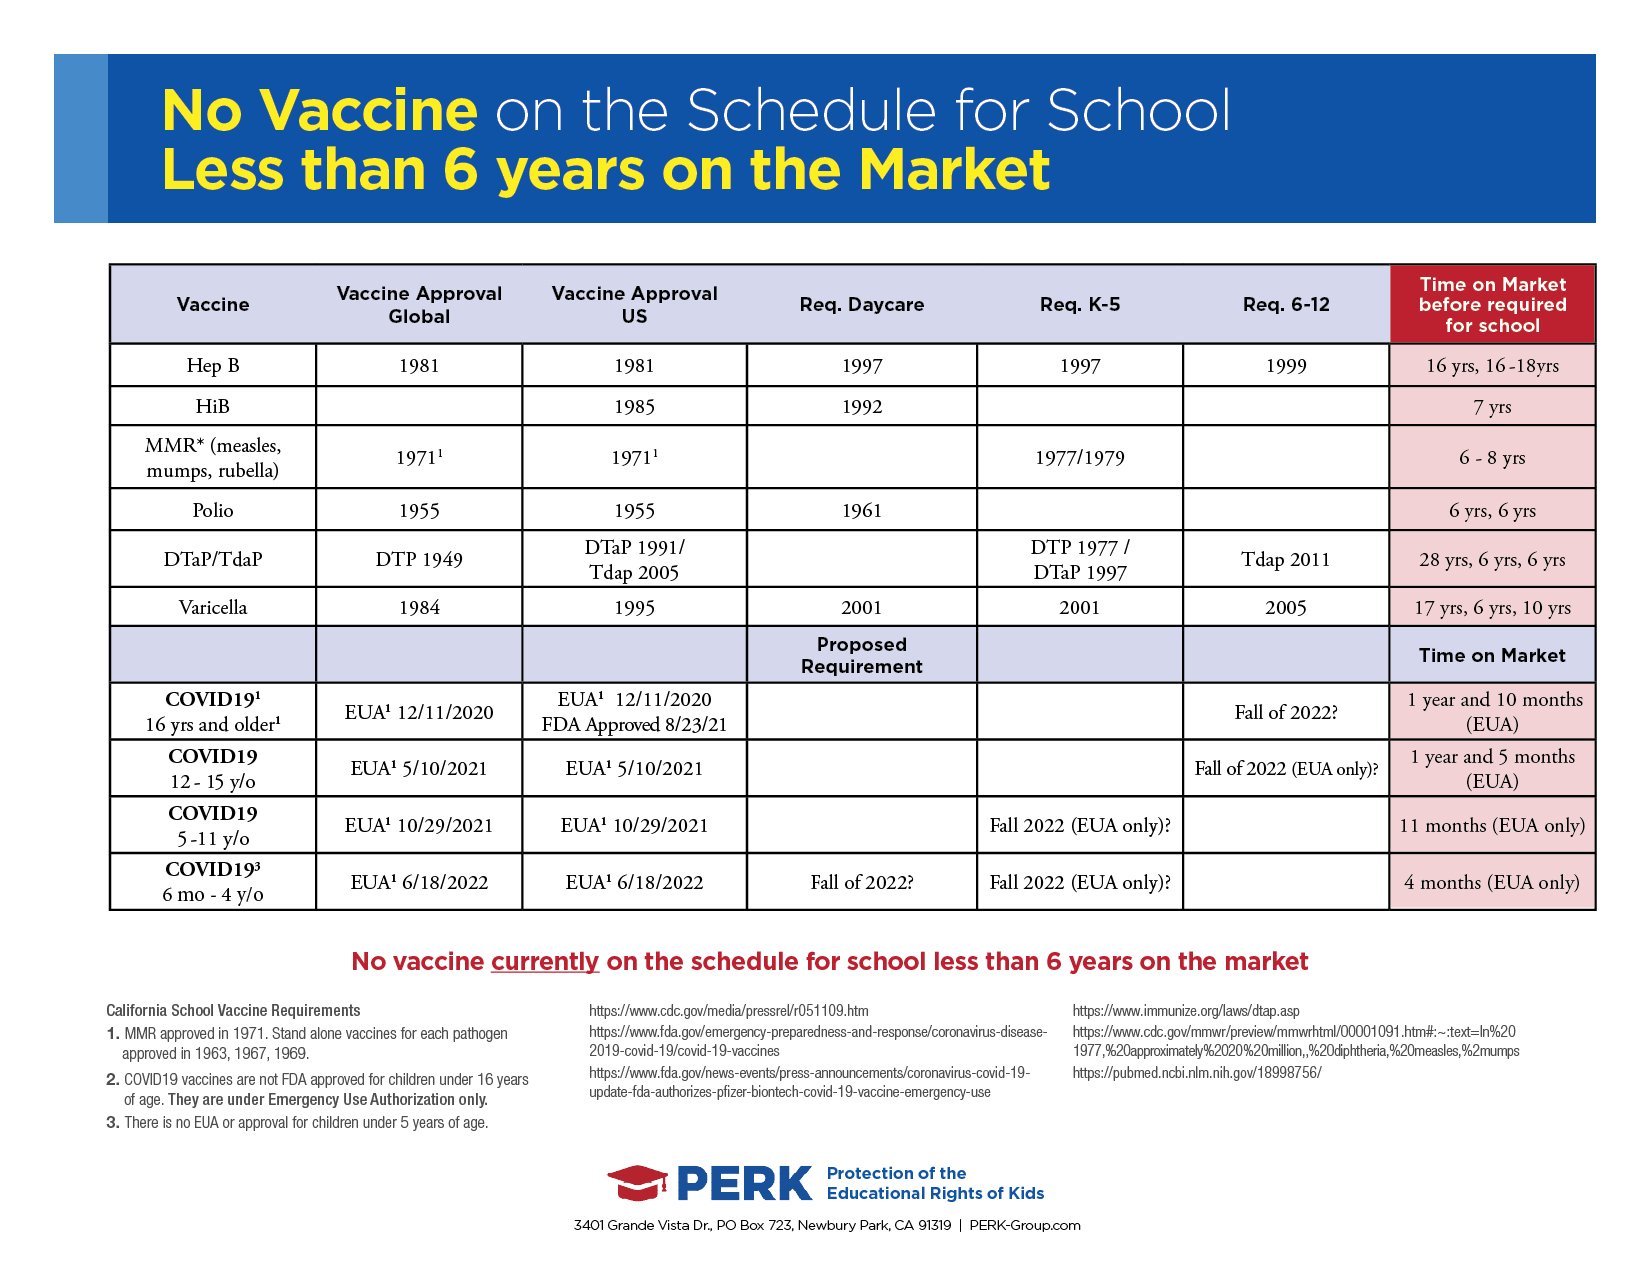 No Vaccine on Schedule for Less than 6 Years 102422.jpg